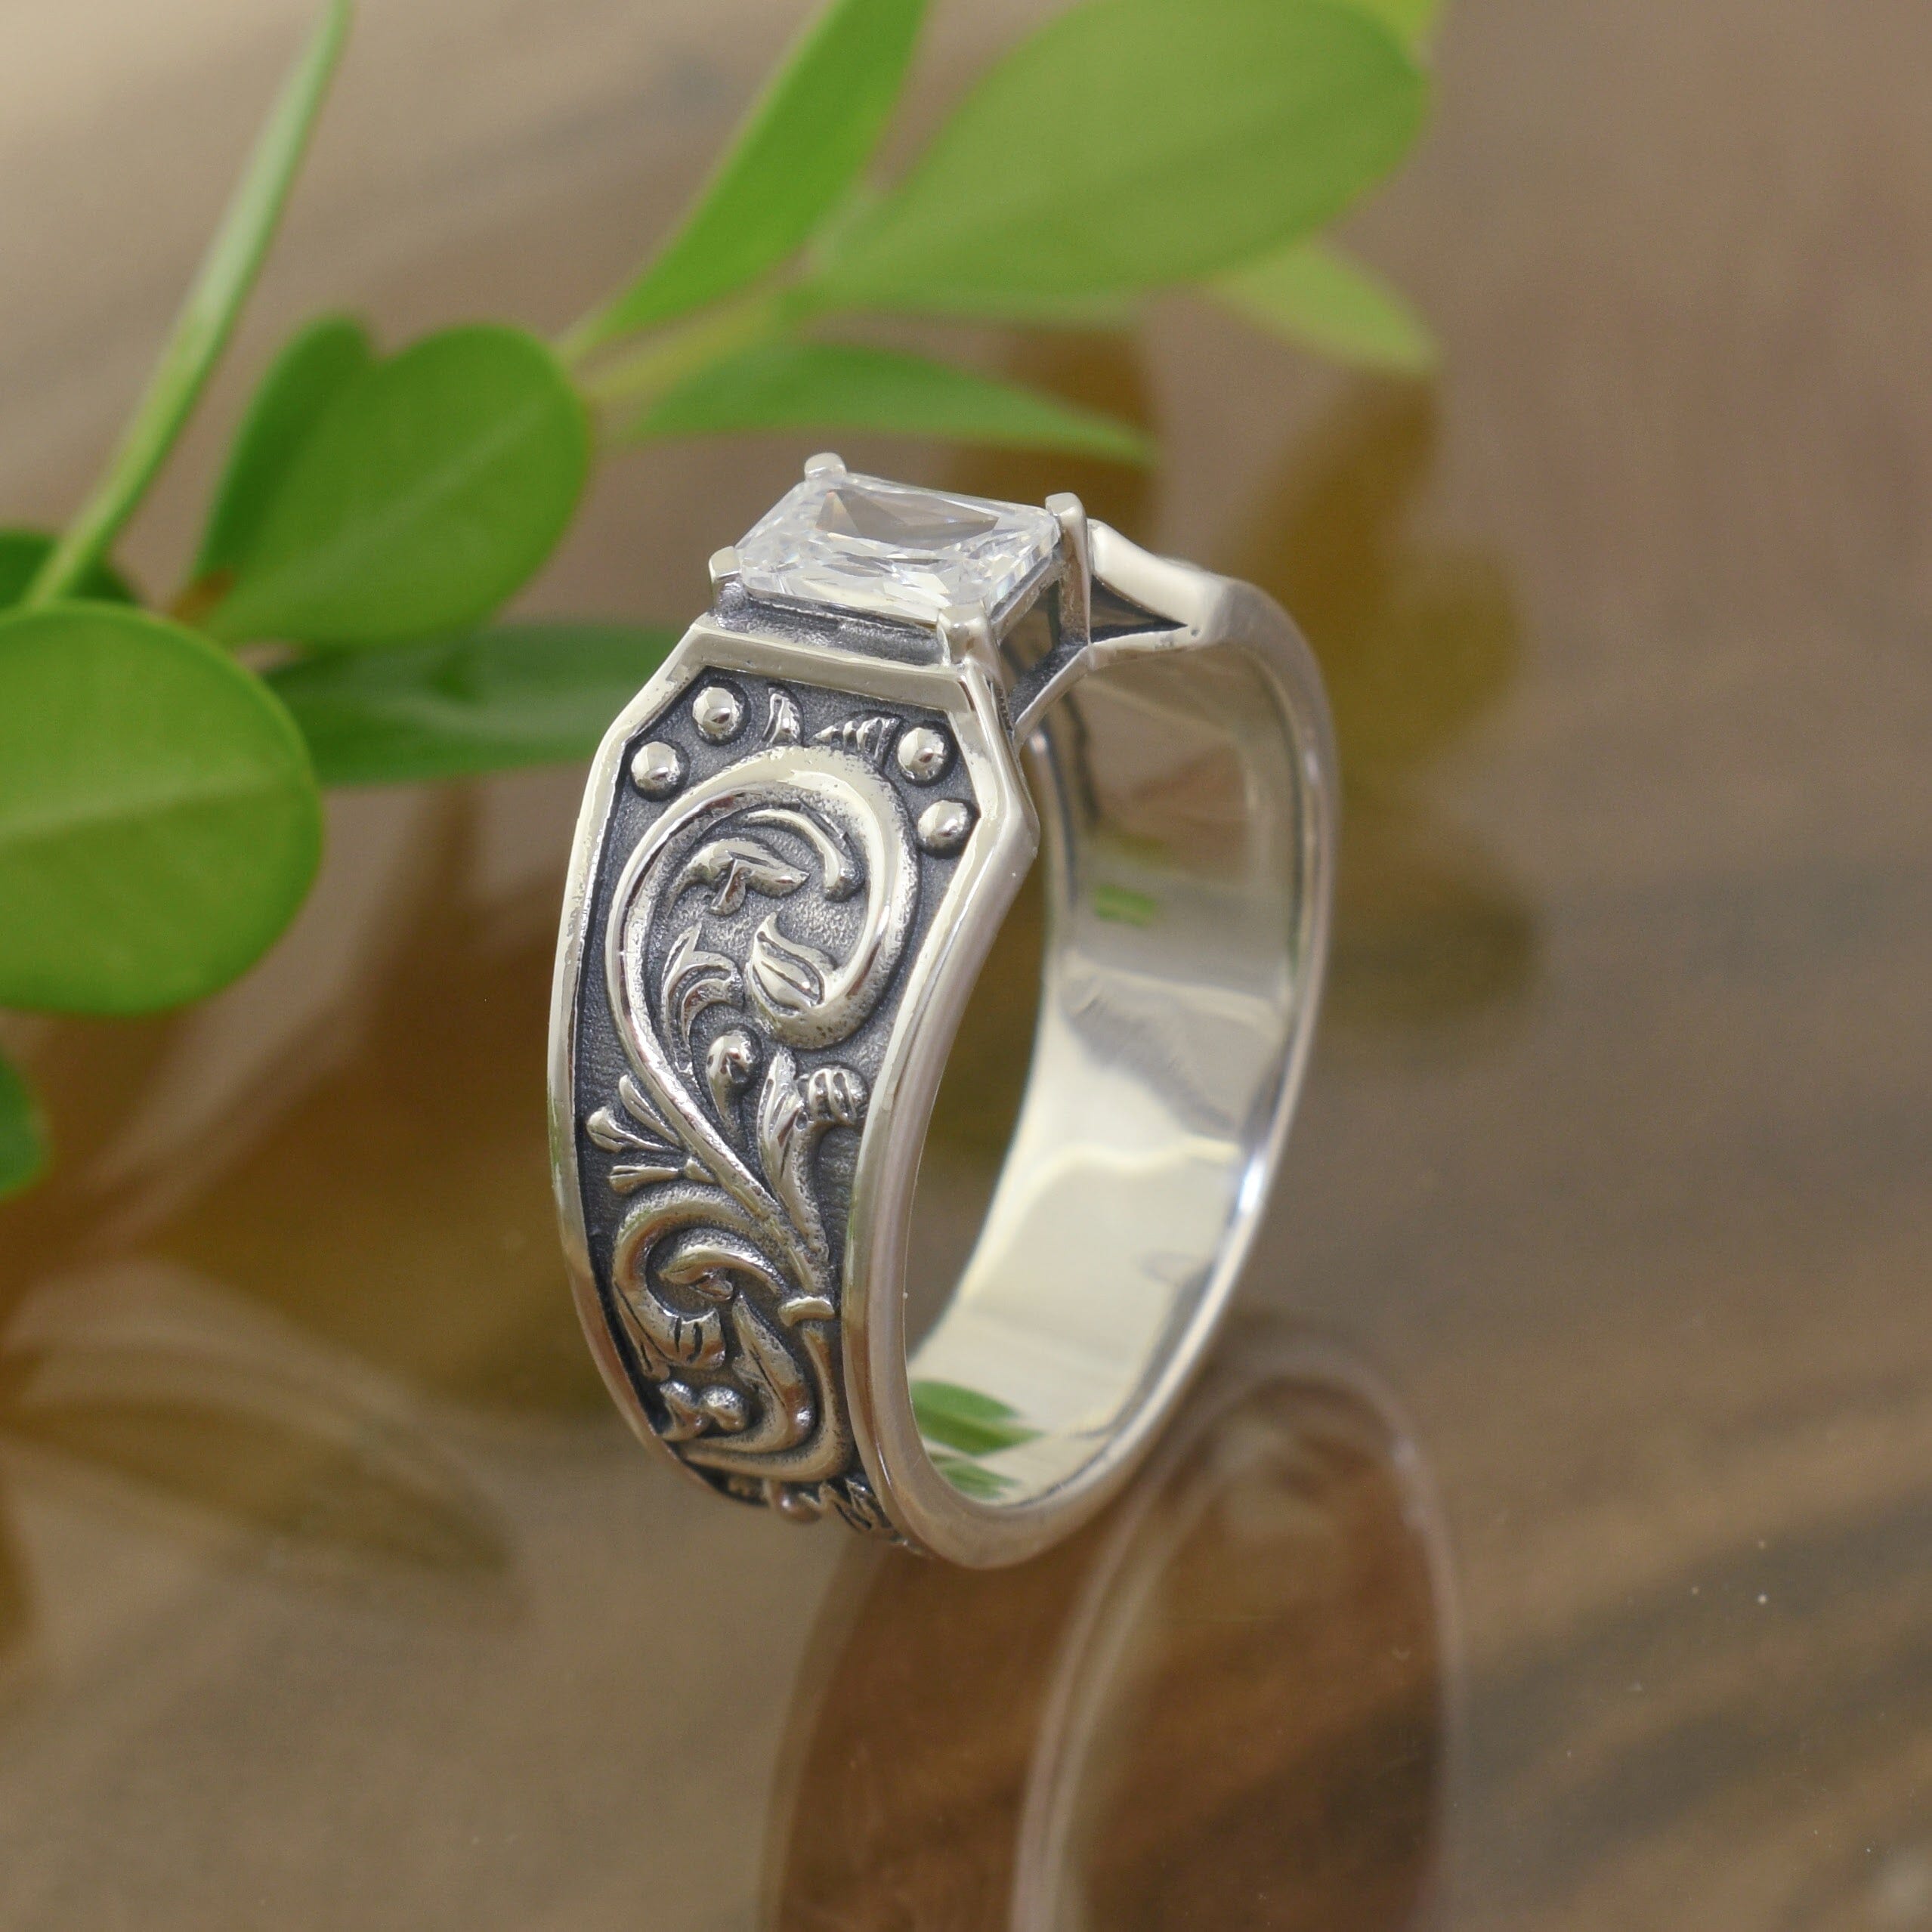 oxidized silver ring with romantic swirl details on the band